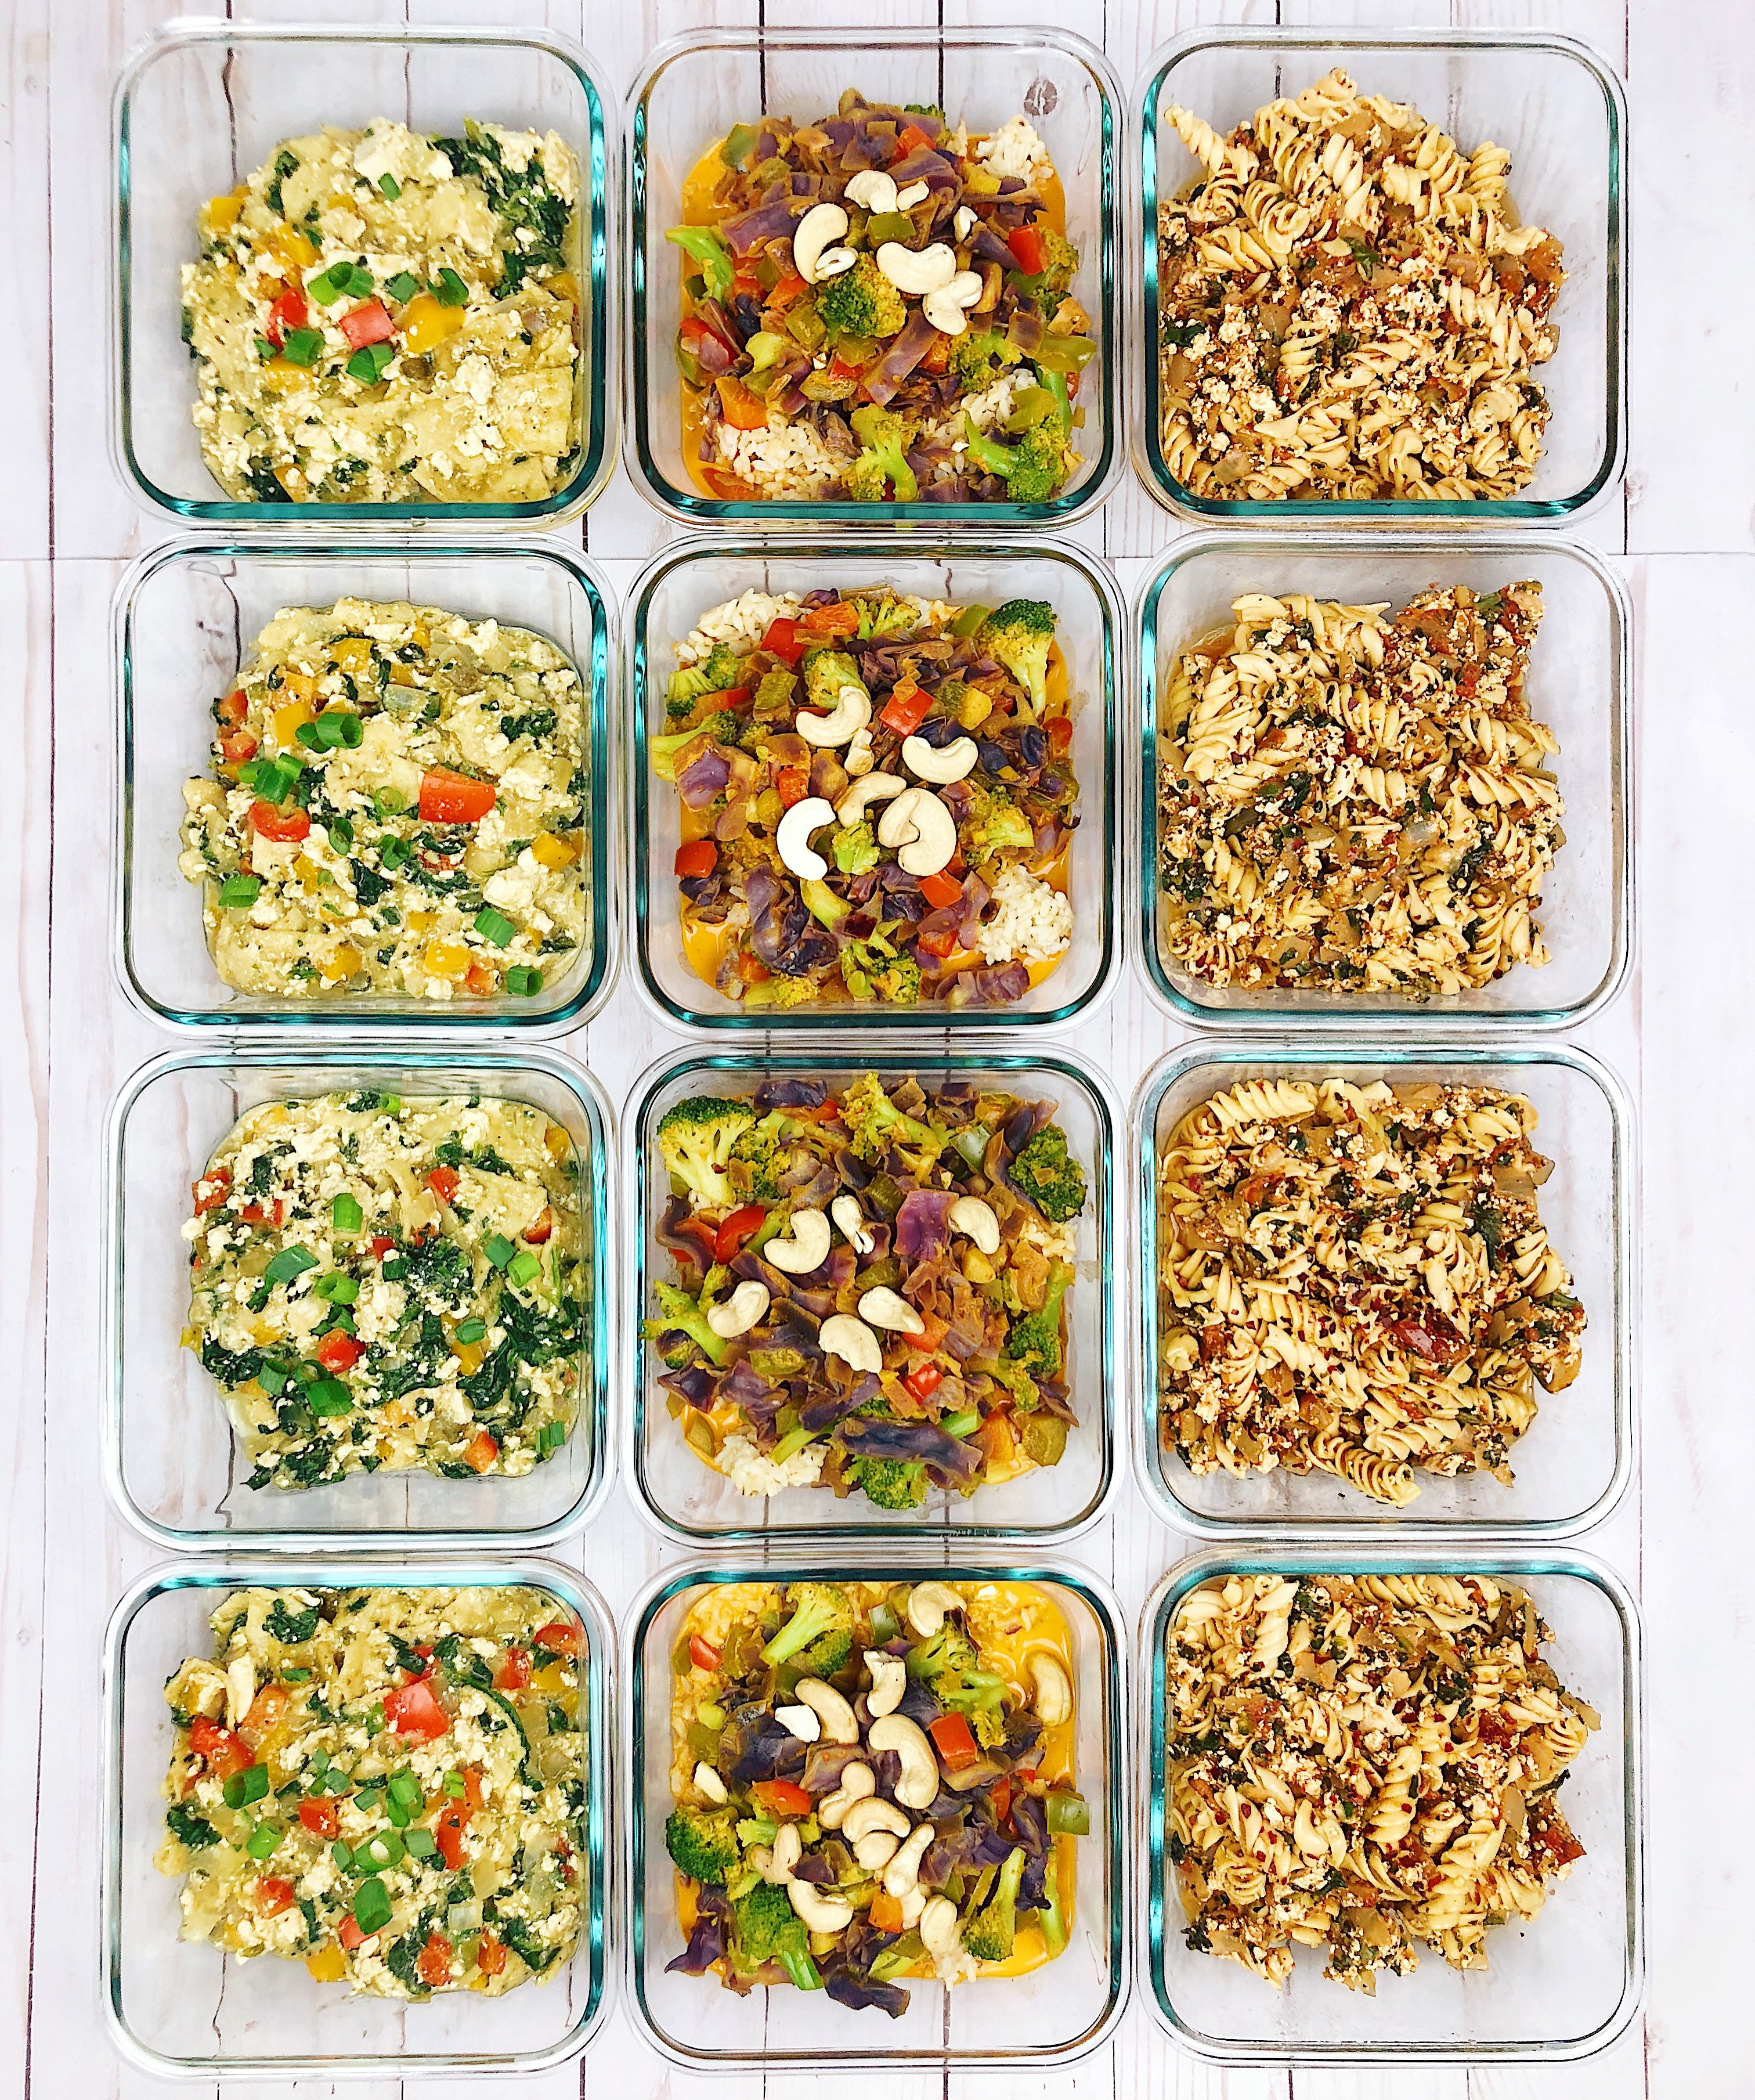 Meal Prep with Tofu Chilaquiles, Yellow Thai Curry, and Chili Mac and Cheese in glass meal prep containers